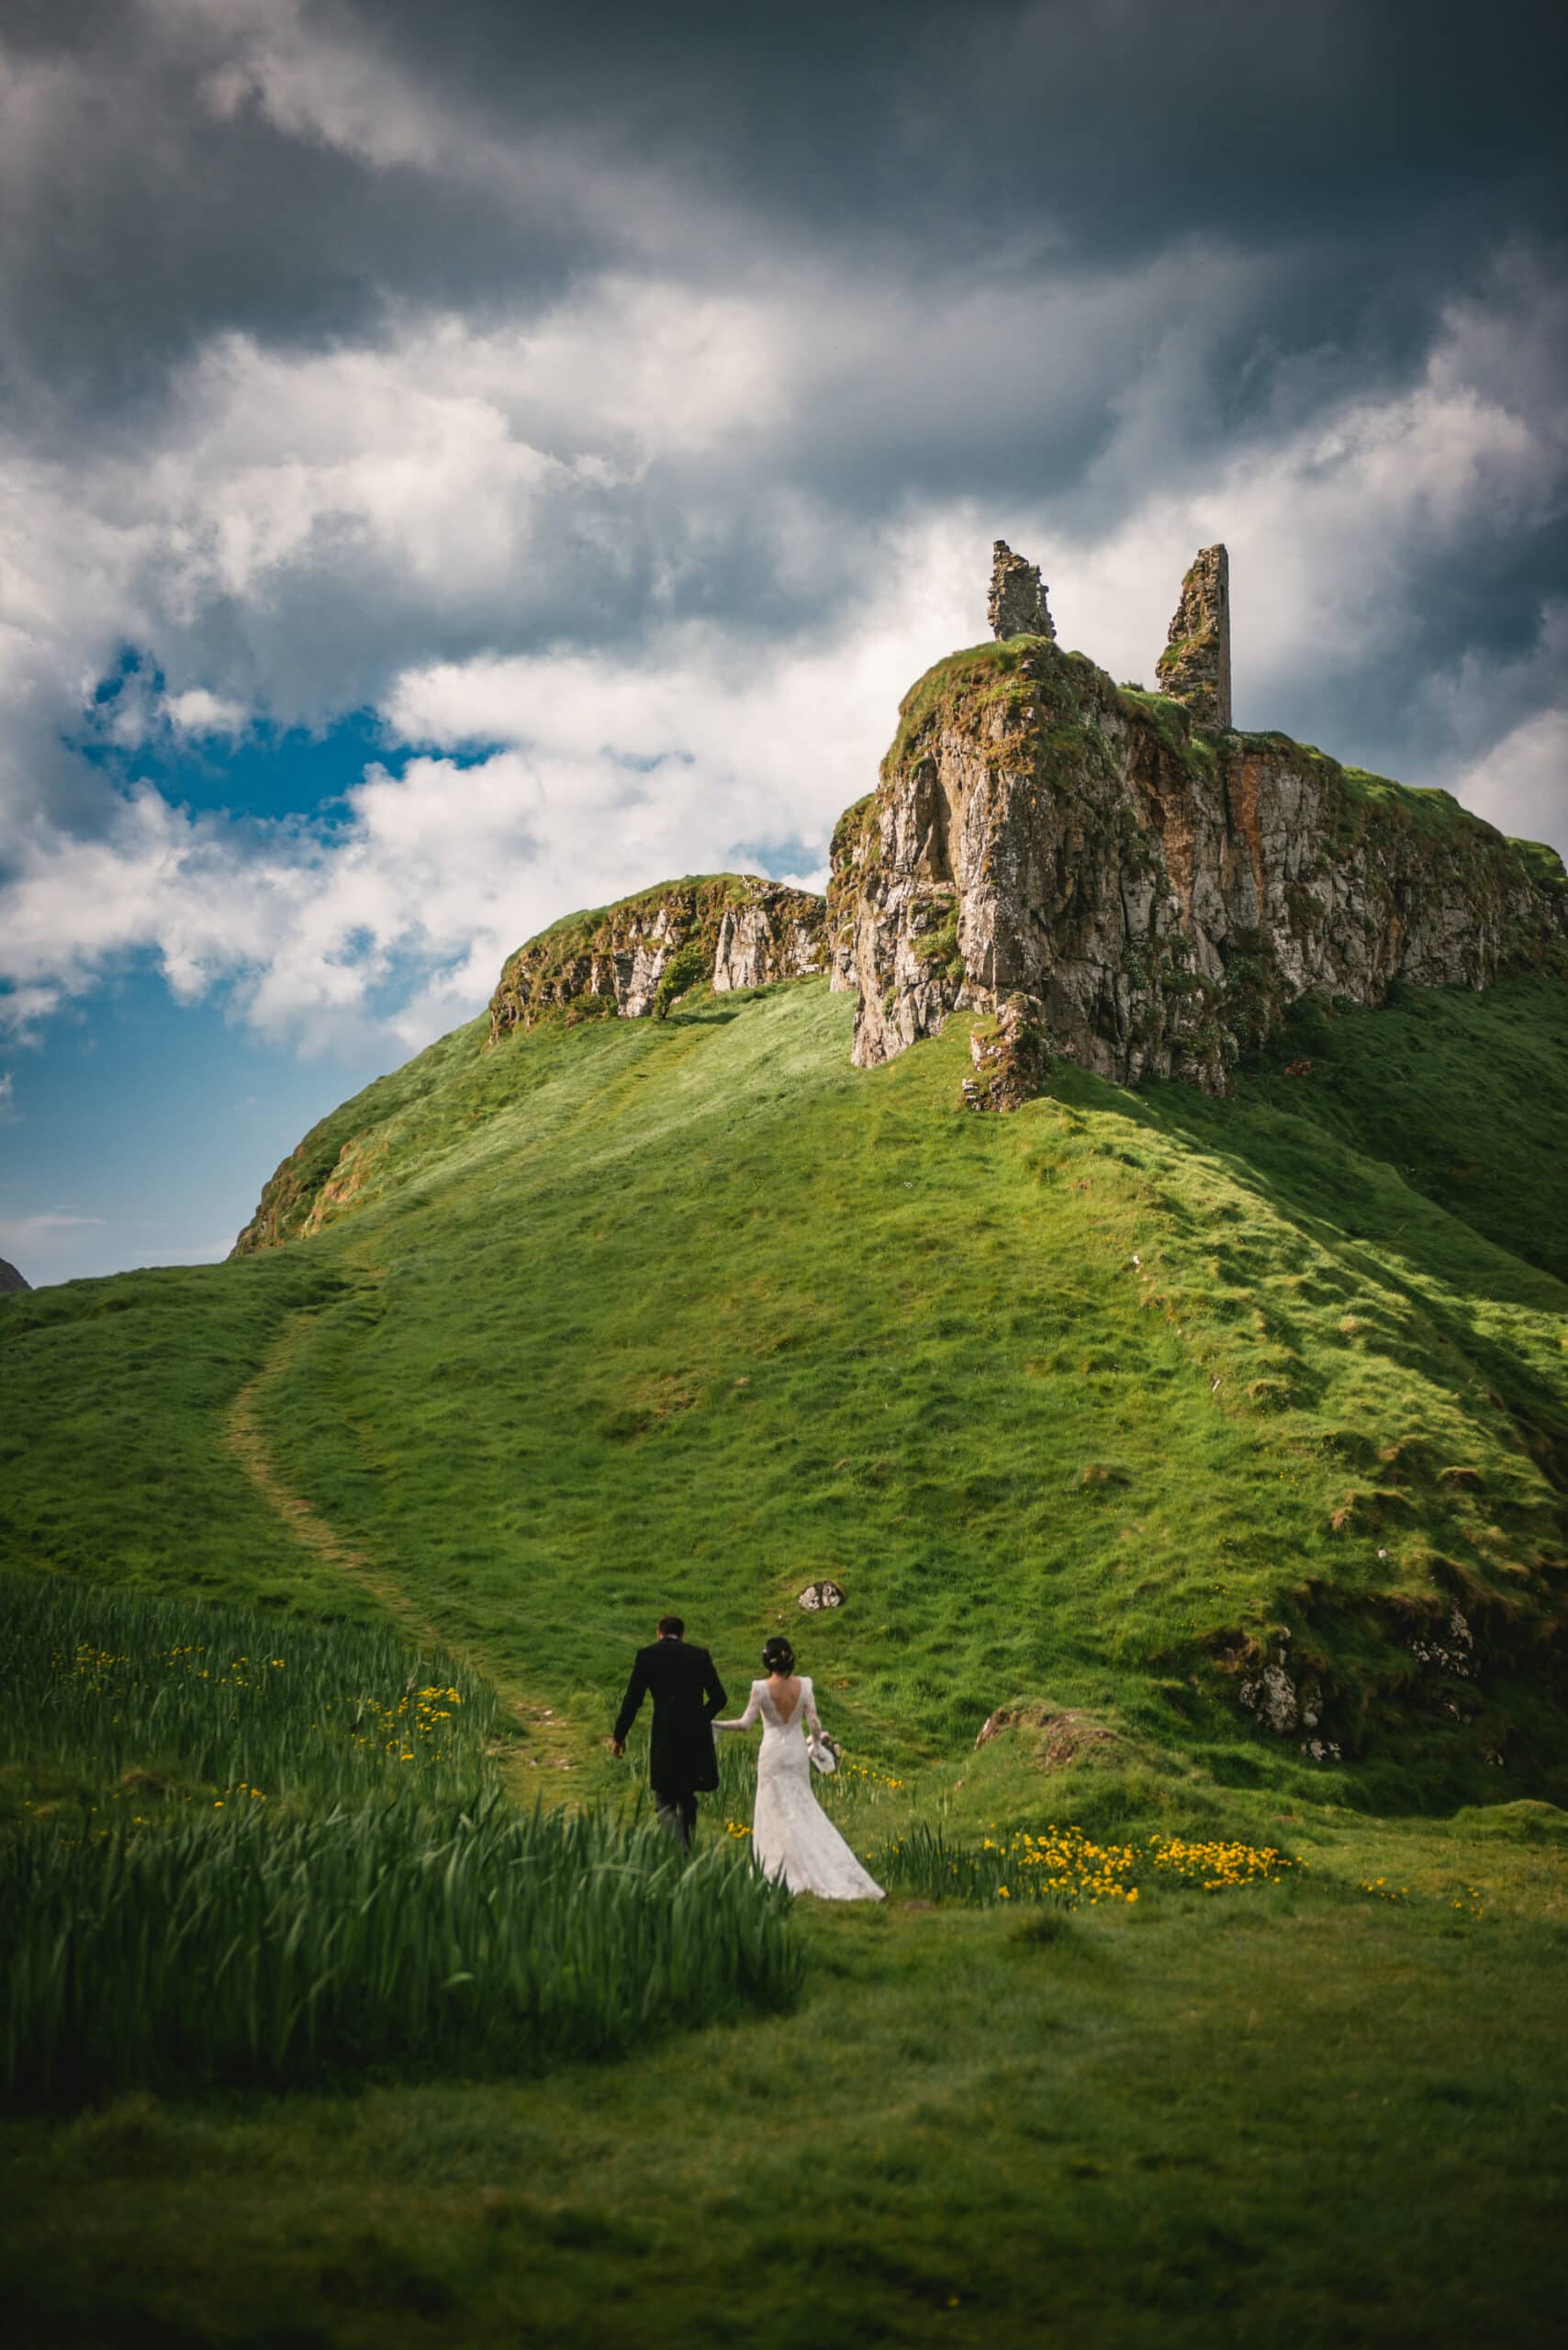 The couple holding hands while exploring the ancient stone walls of the castle during their Northern Ireland elopement.